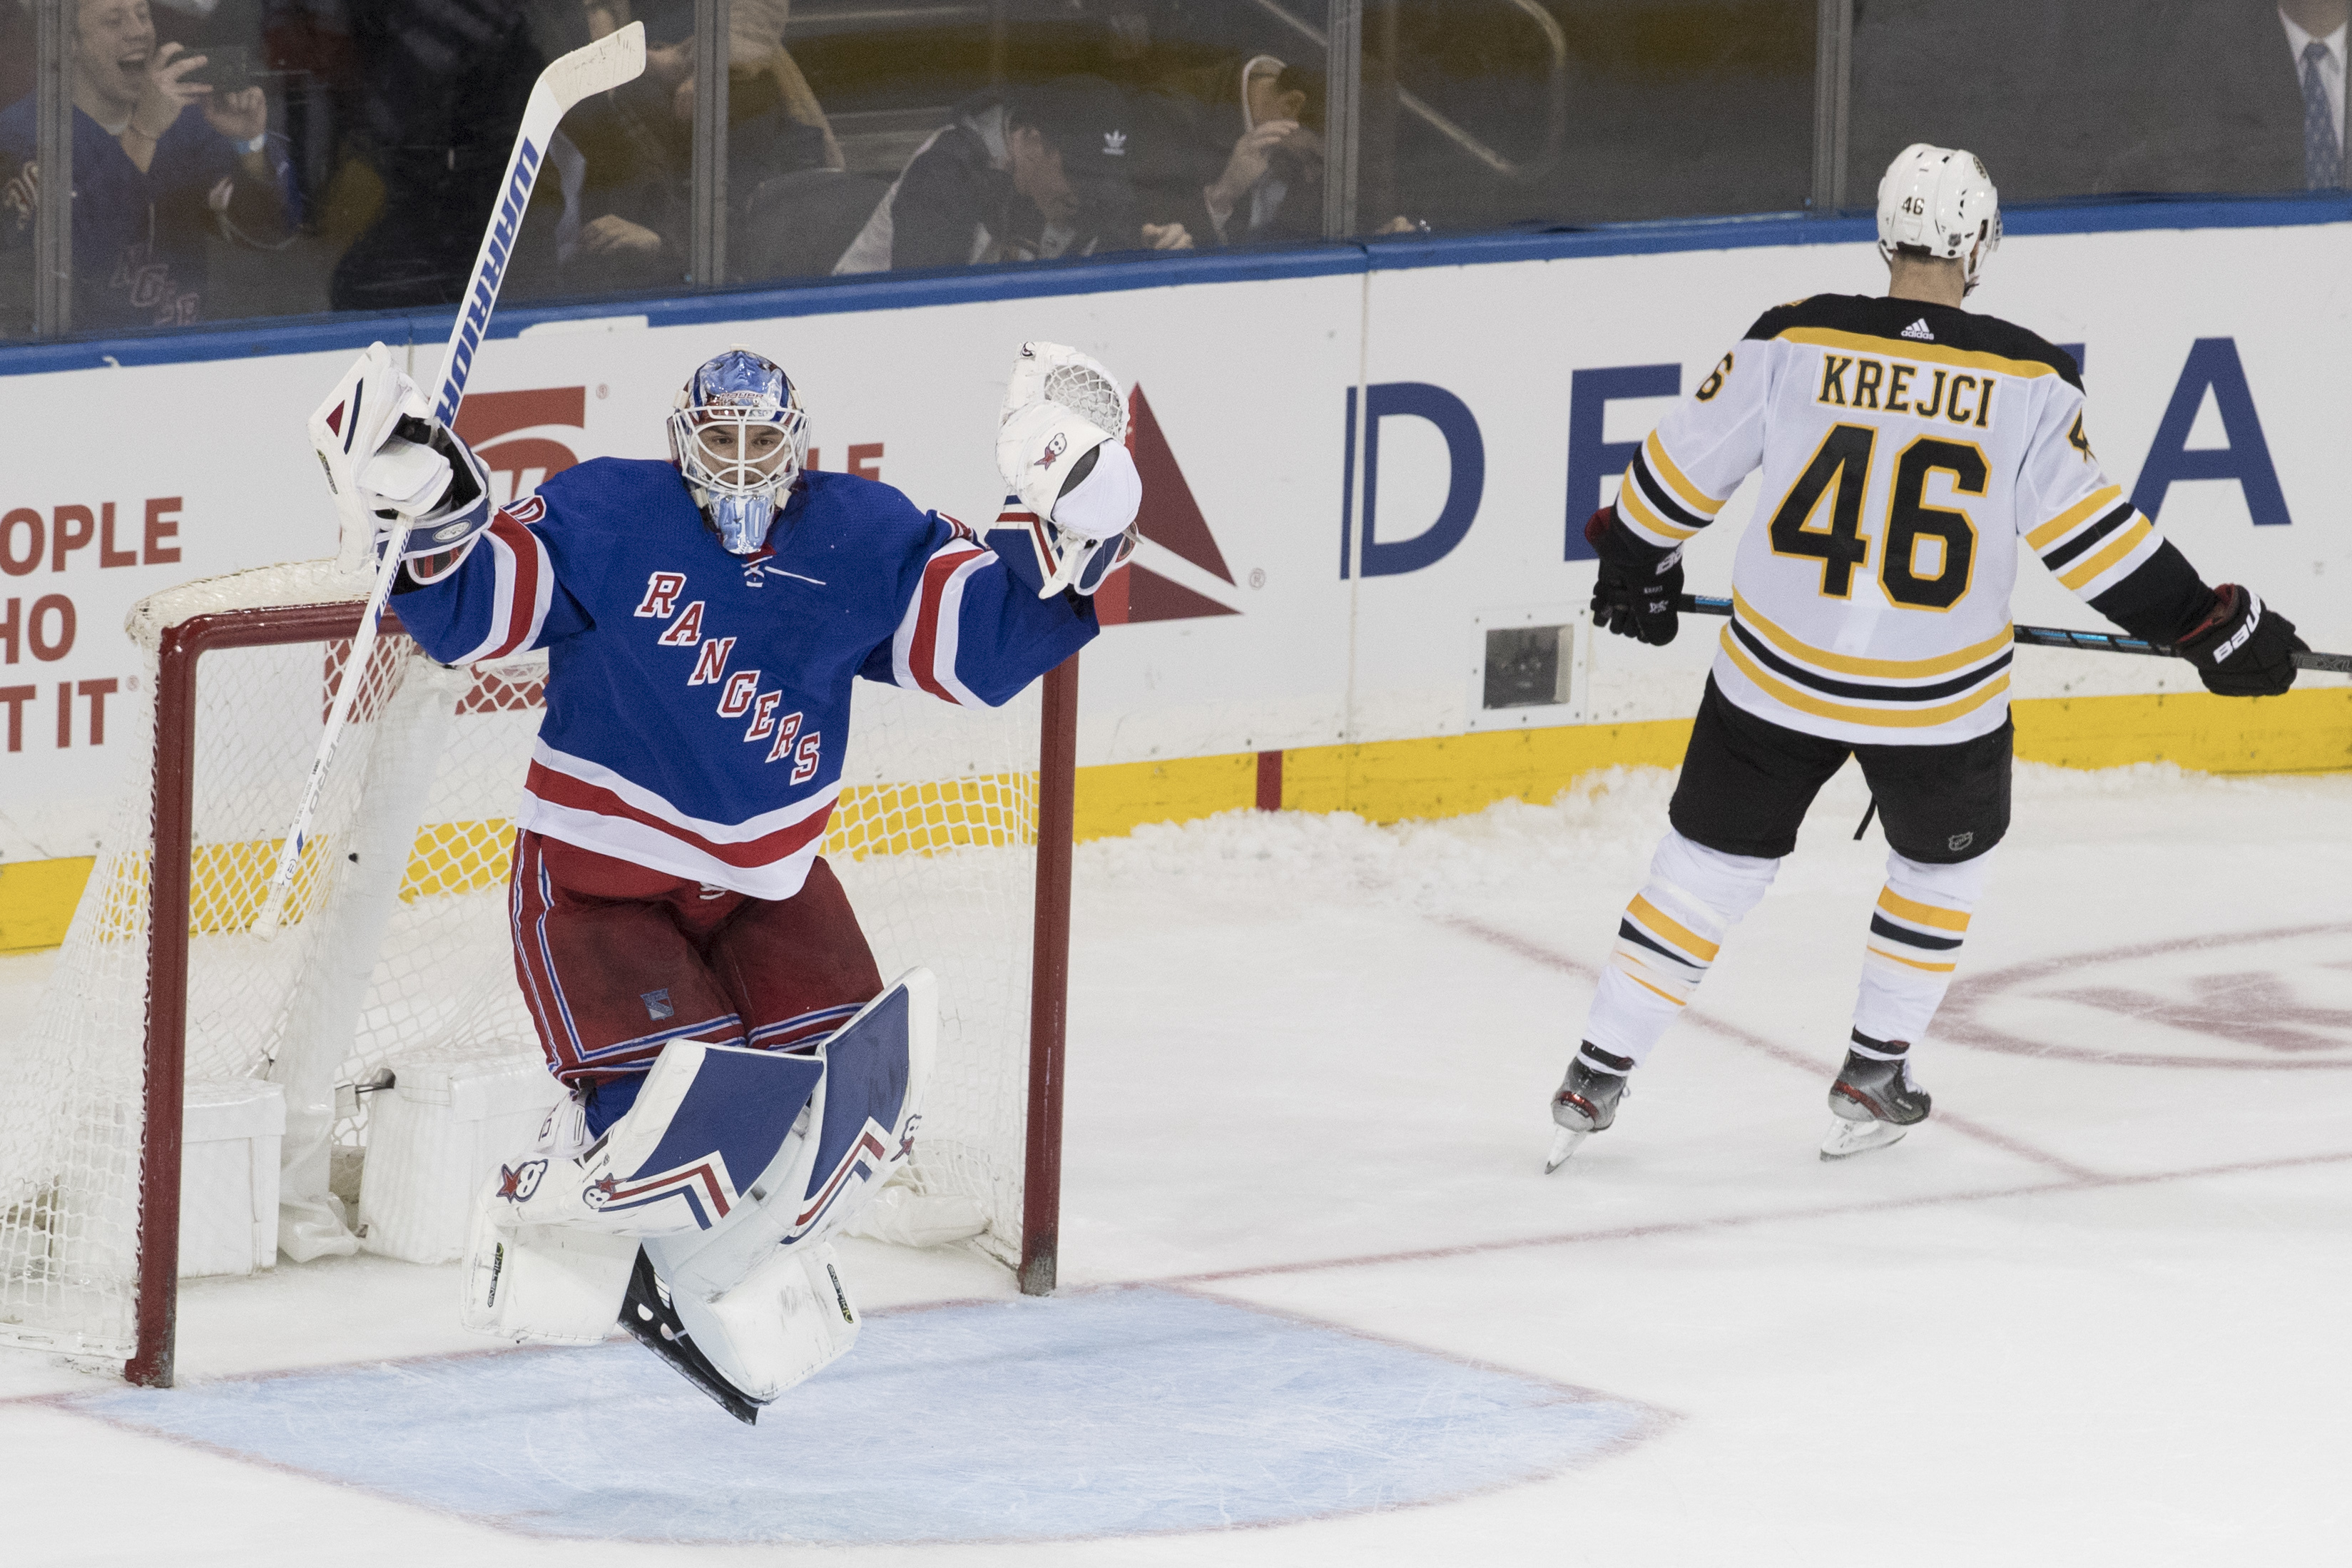 Rangers rally in 3rd, beat Bruins 4-3 in shootout